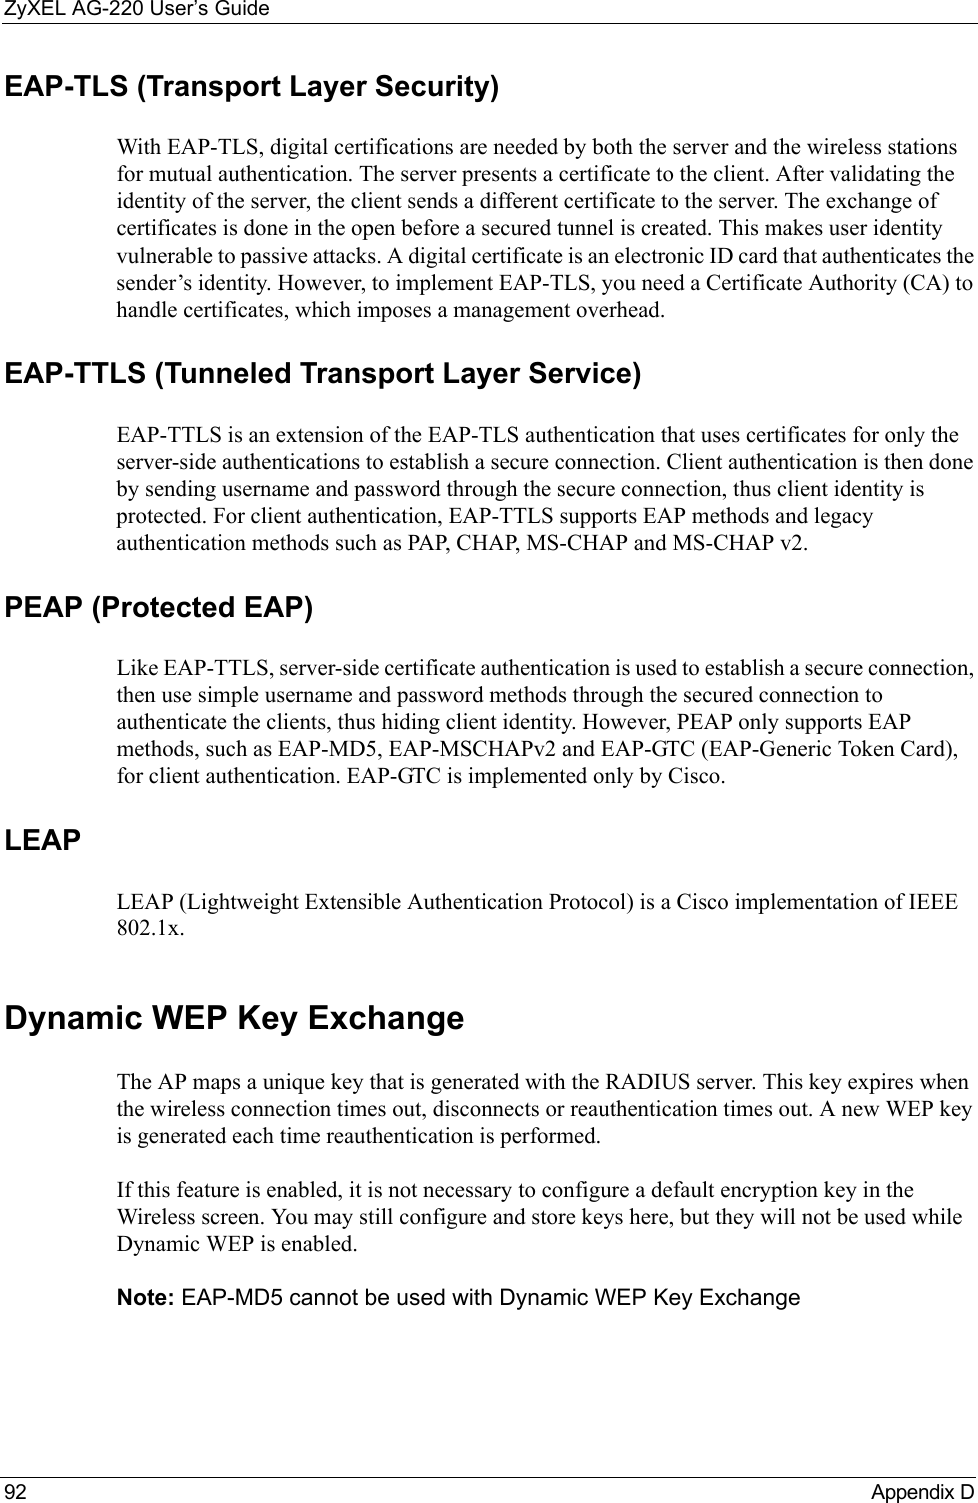 ZyXEL AG-220 User’s Guide92 Appendix DEAP-TLS (Transport Layer Security)With EAP-TLS, digital certifications are needed by both the server and the wireless stations for mutual authentication. The server presents a certificate to the client. After validating the identity of the server, the client sends a different certificate to the server. The exchange of certificates is done in the open before a secured tunnel is created. This makes user identity vulnerable to passive attacks. A digital certificate is an electronic ID card that authenticates the sender’s identity. However, to implement EAP-TLS, you need a Certificate Authority (CA) to handle certificates, which imposes a management overhead. EAP-TTLS (Tunneled Transport Layer Service) EAP-TTLS is an extension of the EAP-TLS authentication that uses certificates for only the server-side authentications to establish a secure connection. Client authentication is then done by sending username and password through the secure connection, thus client identity is protected. For client authentication, EAP-TTLS supports EAP methods and legacy authentication methods such as PAP, CHAP, MS-CHAP and MS-CHAP v2. PEAP (Protected EAP)   Like EAP-TTLS, server-side certificate authentication is used to establish a secure connection, then use simple username and password methods through the secured connection to authenticate the clients, thus hiding client identity. However, PEAP only supports EAP methods, such as EAP-MD5, EAP-MSCHAPv2 and EAP-GTC (EAP-Generic Token Card), for client authentication. EAP-GTC is implemented only by Cisco.LEAPLEAP (Lightweight Extensible Authentication Protocol) is a Cisco implementation of IEEE 802.1x. Dynamic WEP Key ExchangeThe AP maps a unique key that is generated with the RADIUS server. This key expires when the wireless connection times out, disconnects or reauthentication times out. A new WEP key is generated each time reauthentication is performed.If this feature is enabled, it is not necessary to configure a default encryption key in the Wireless screen. You may still configure and store keys here, but they will not be used while Dynamic WEP is enabled.Note: EAP-MD5 cannot be used with Dynamic WEP Key Exchange